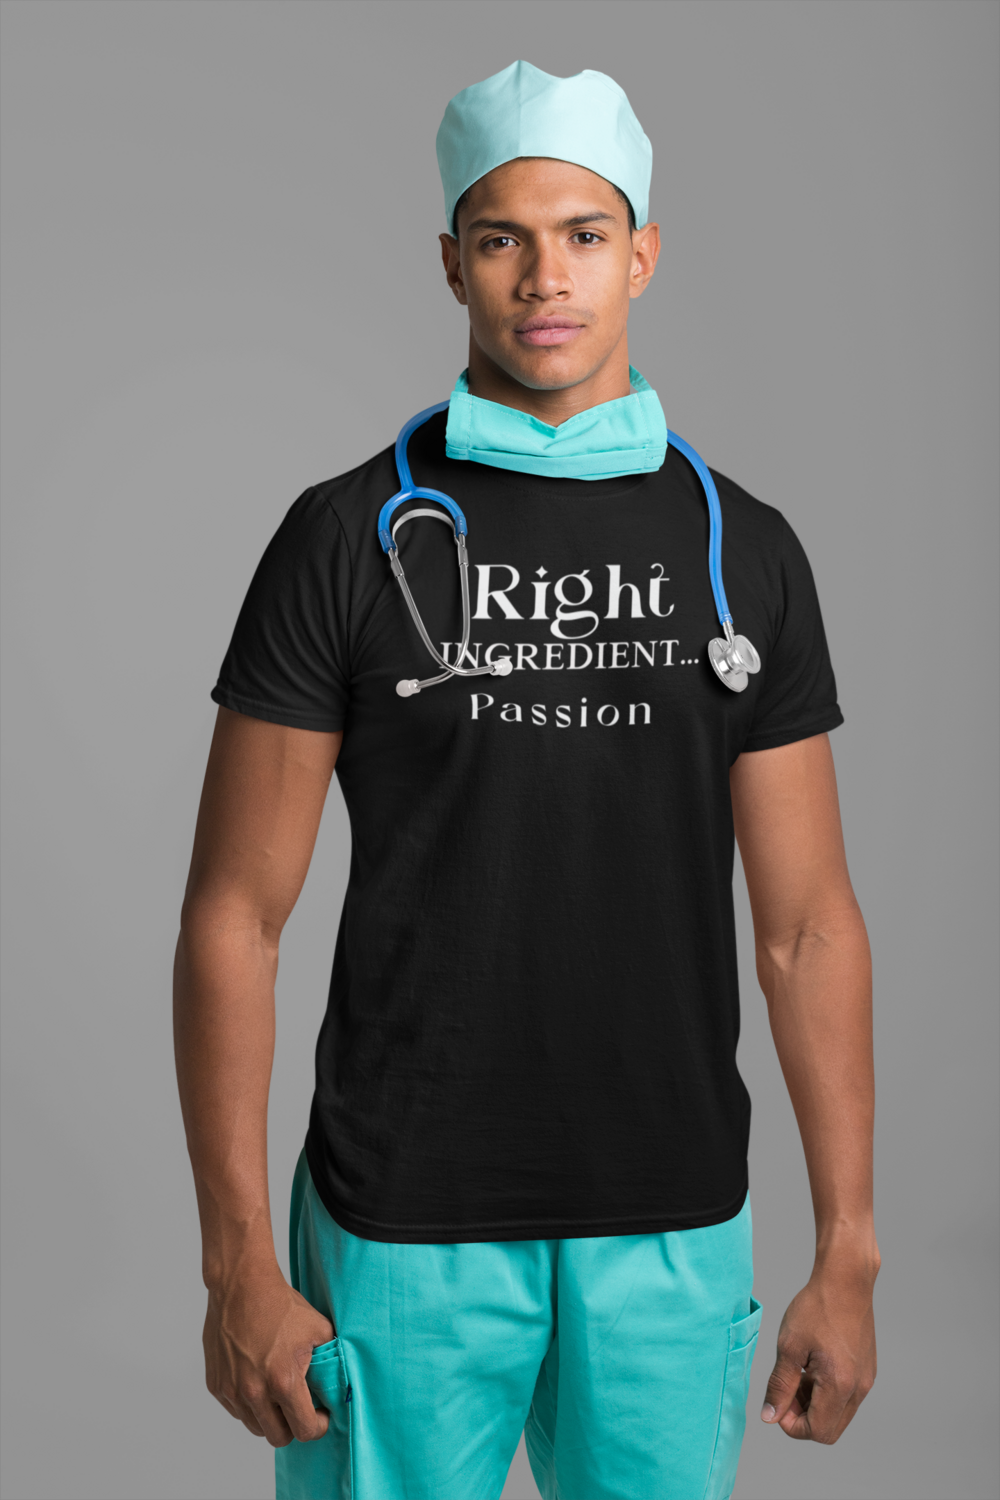 "Right Ingredient... Passion" Unisex Short-sleeved t-shirt